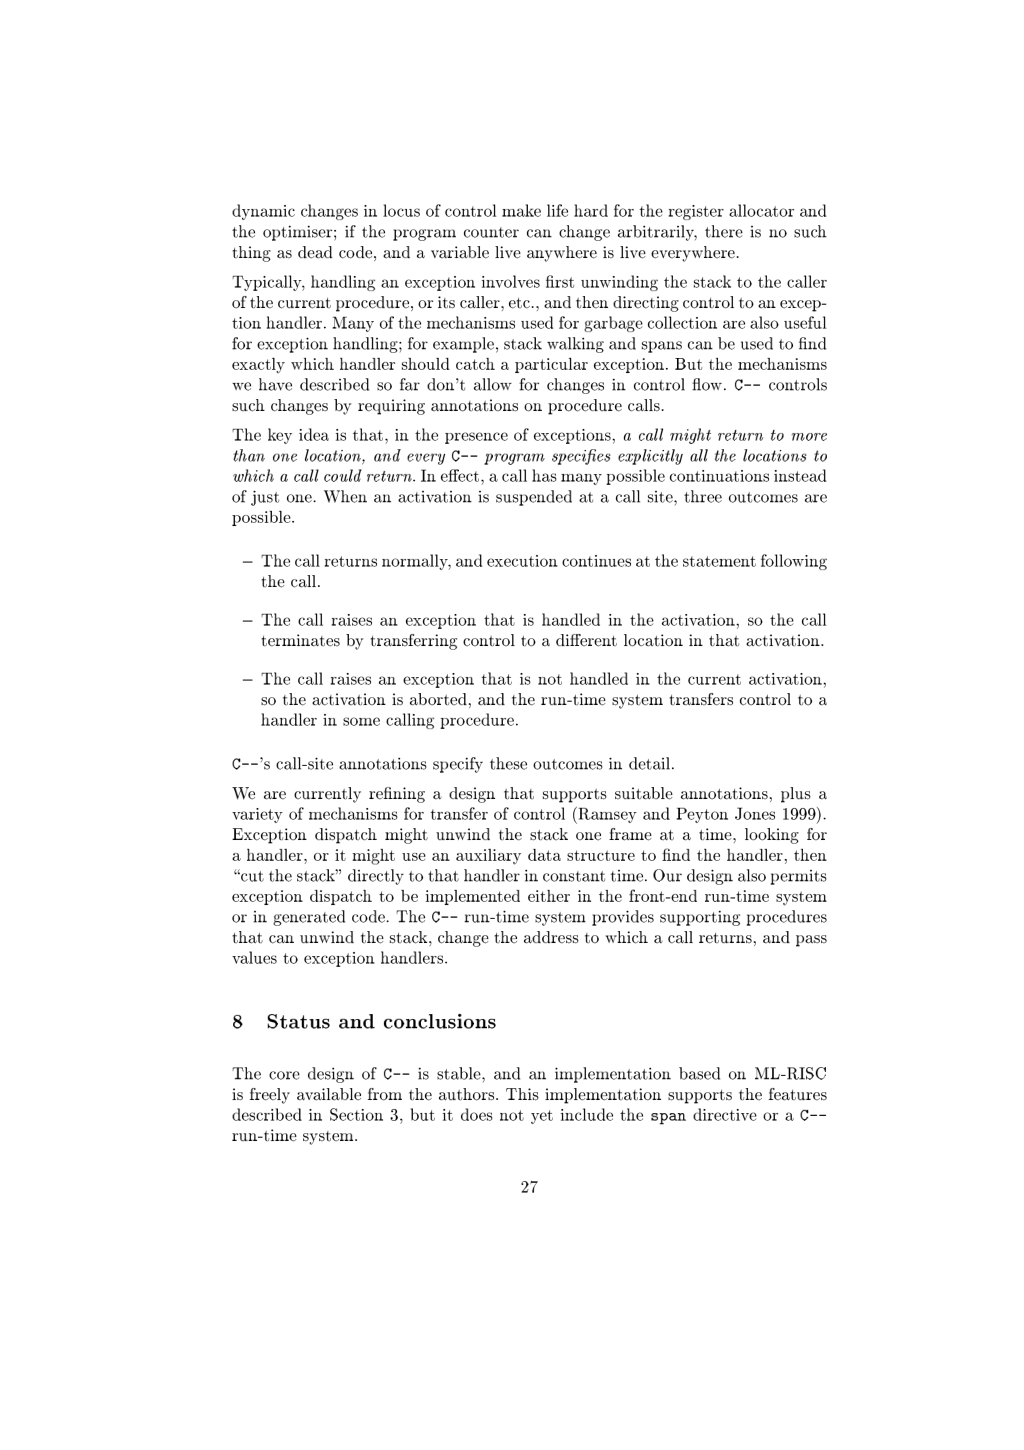 page 27